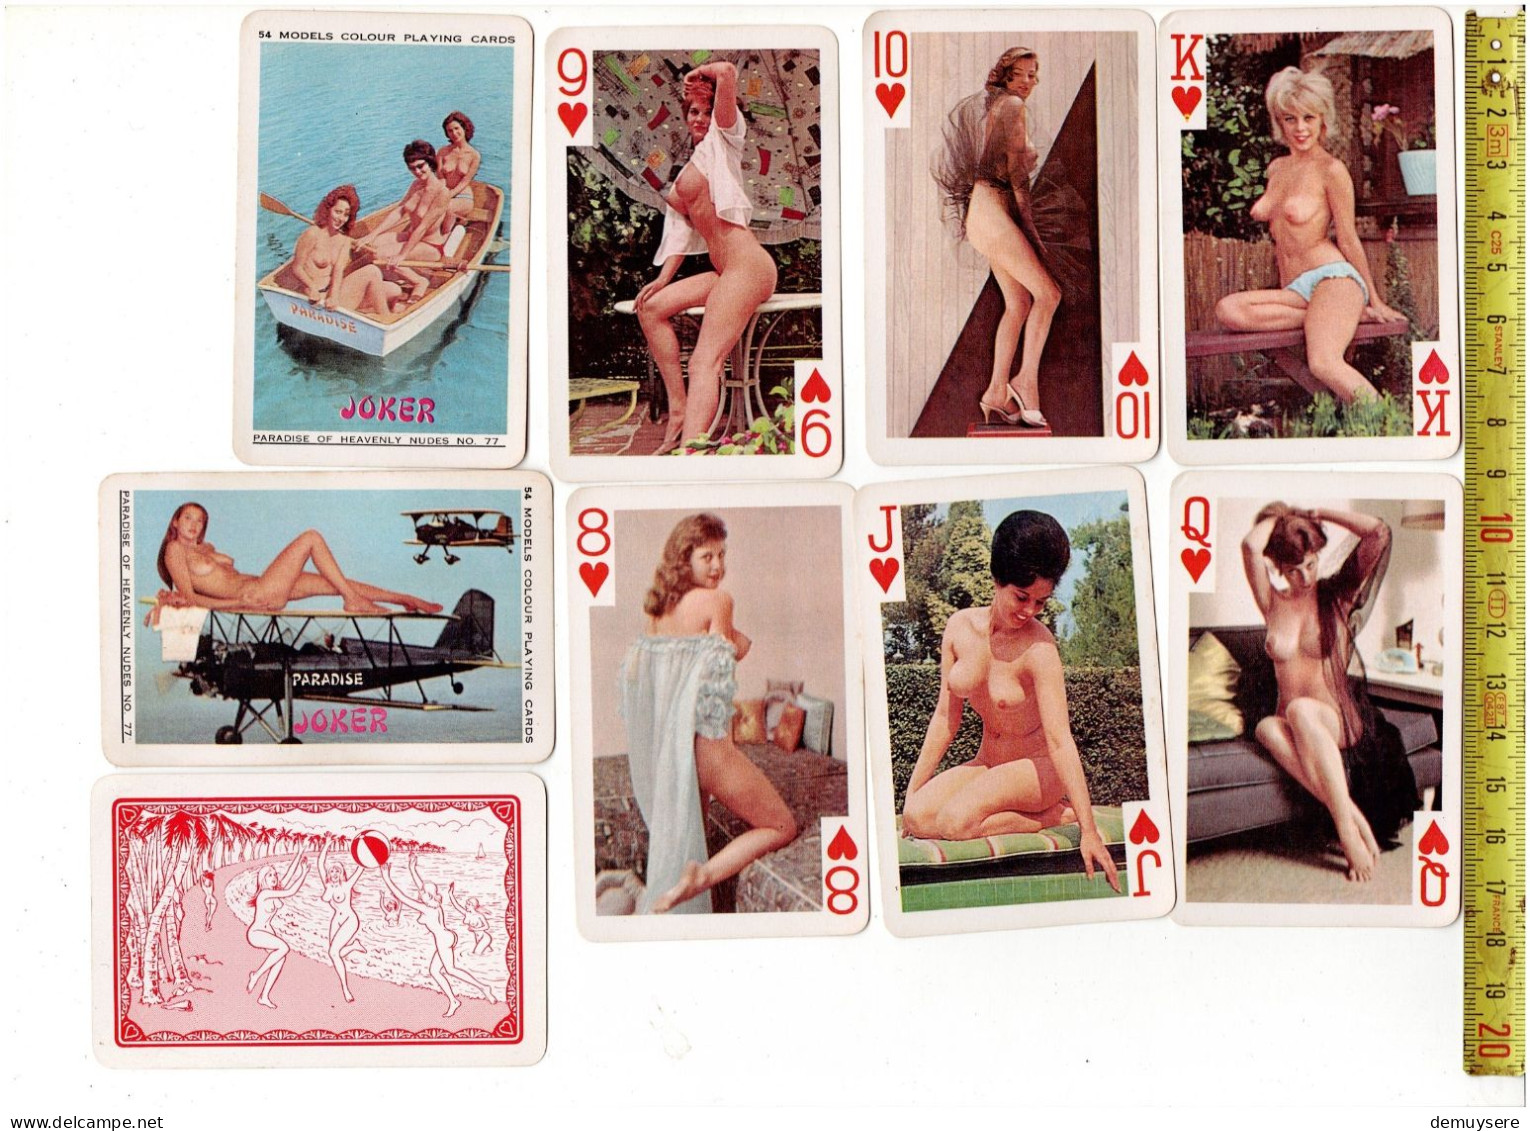 KL 3757 - MODELS COLOUR PLAYING CARDS - PARADISE OF HEAVENLY NUDES NO 77 - Kartenspiele (traditionell)